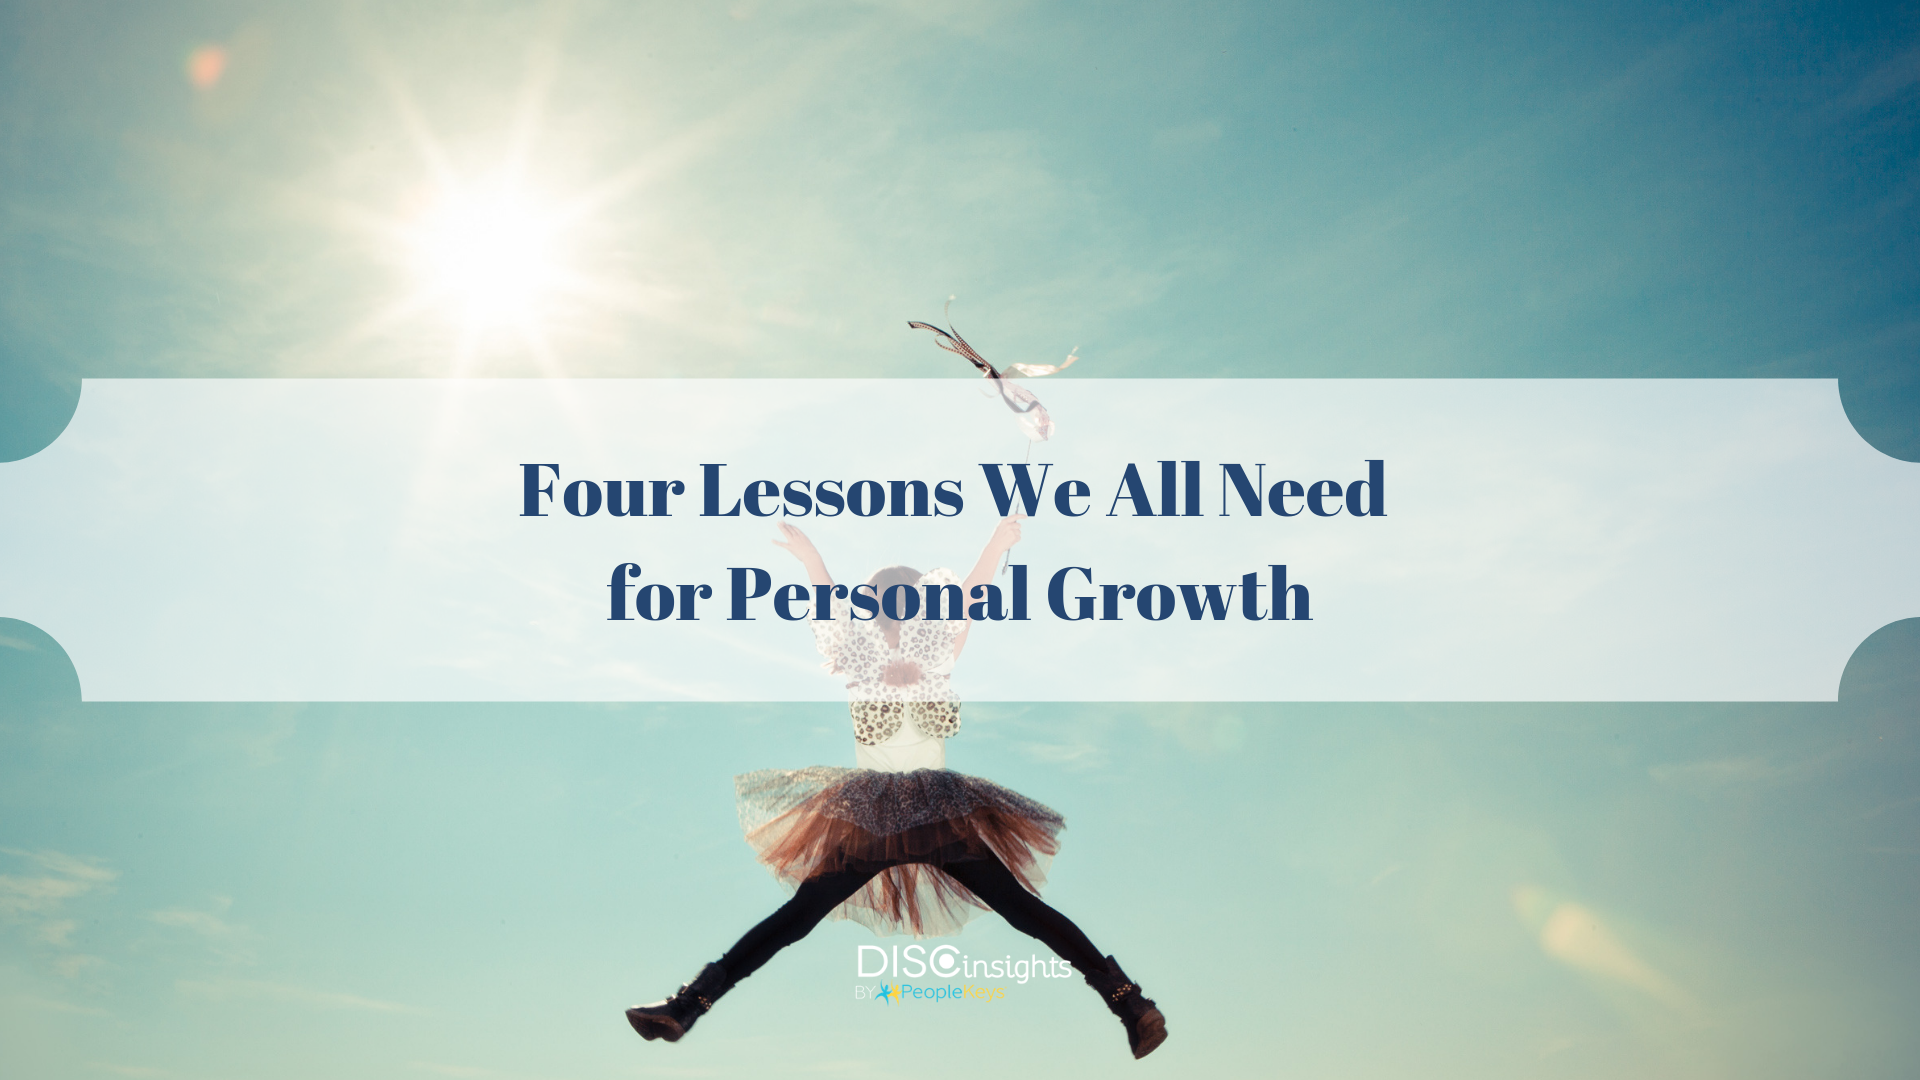 Four Lessons We All Need for Personal Growth